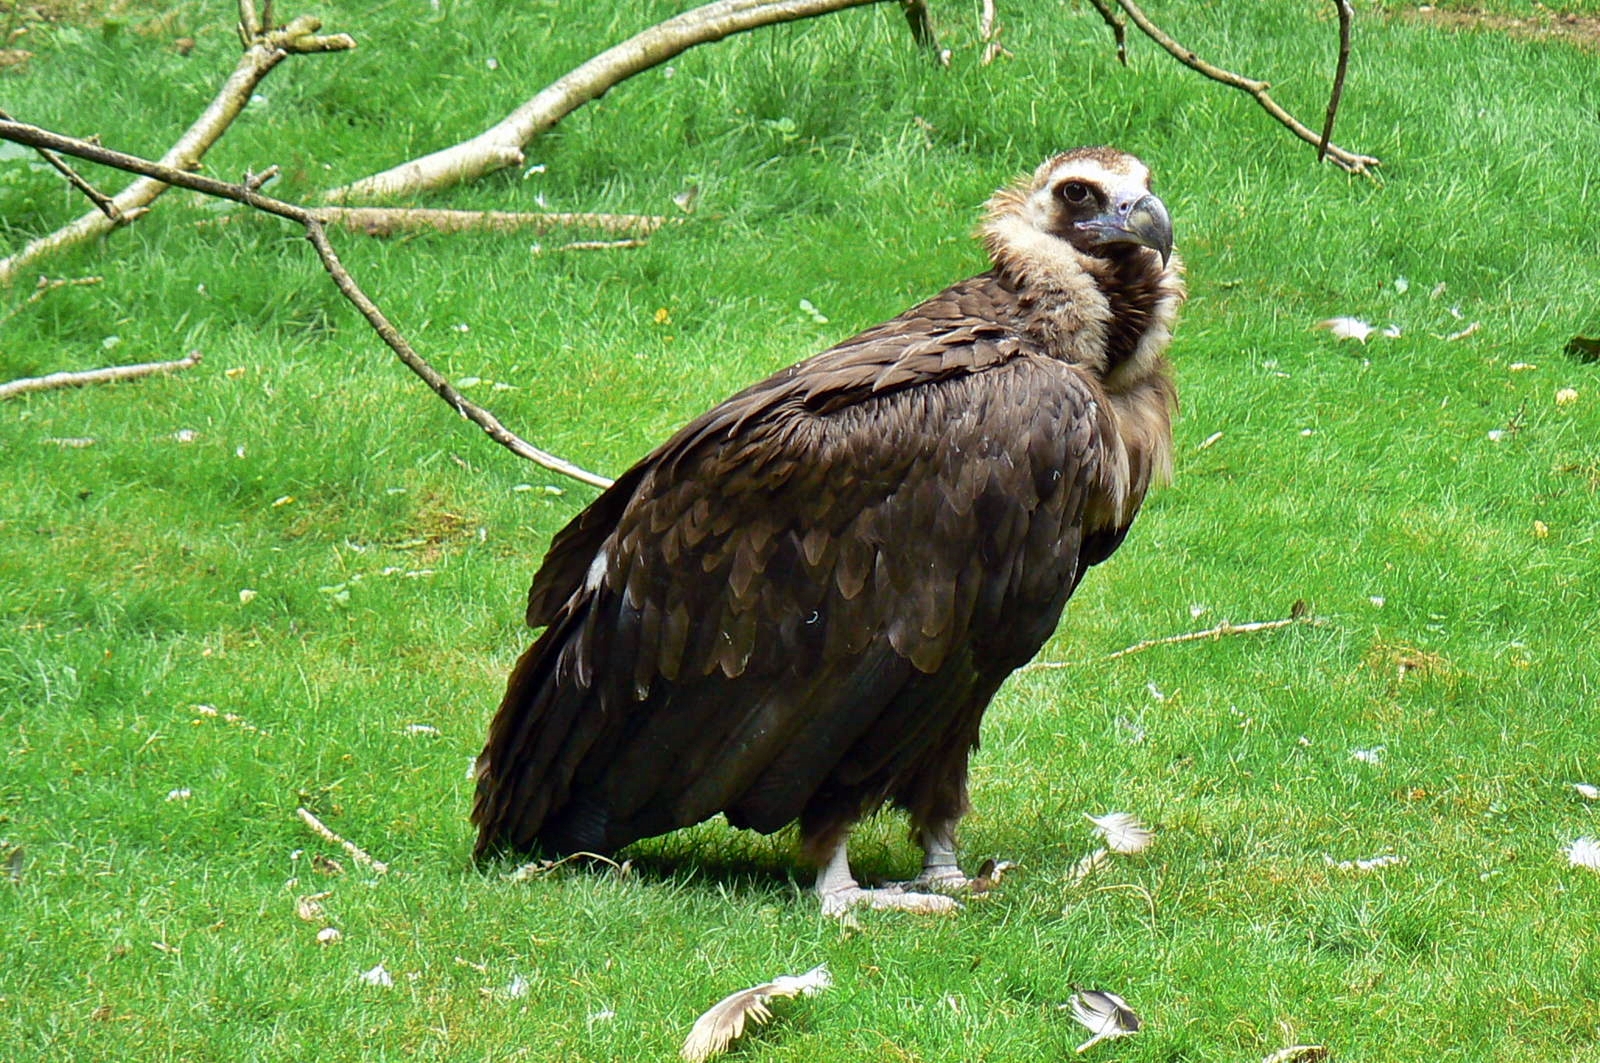 This is a cinereous vulture. This is not the bird that we saw, as we didn't want to take pictures of such a sad situation.